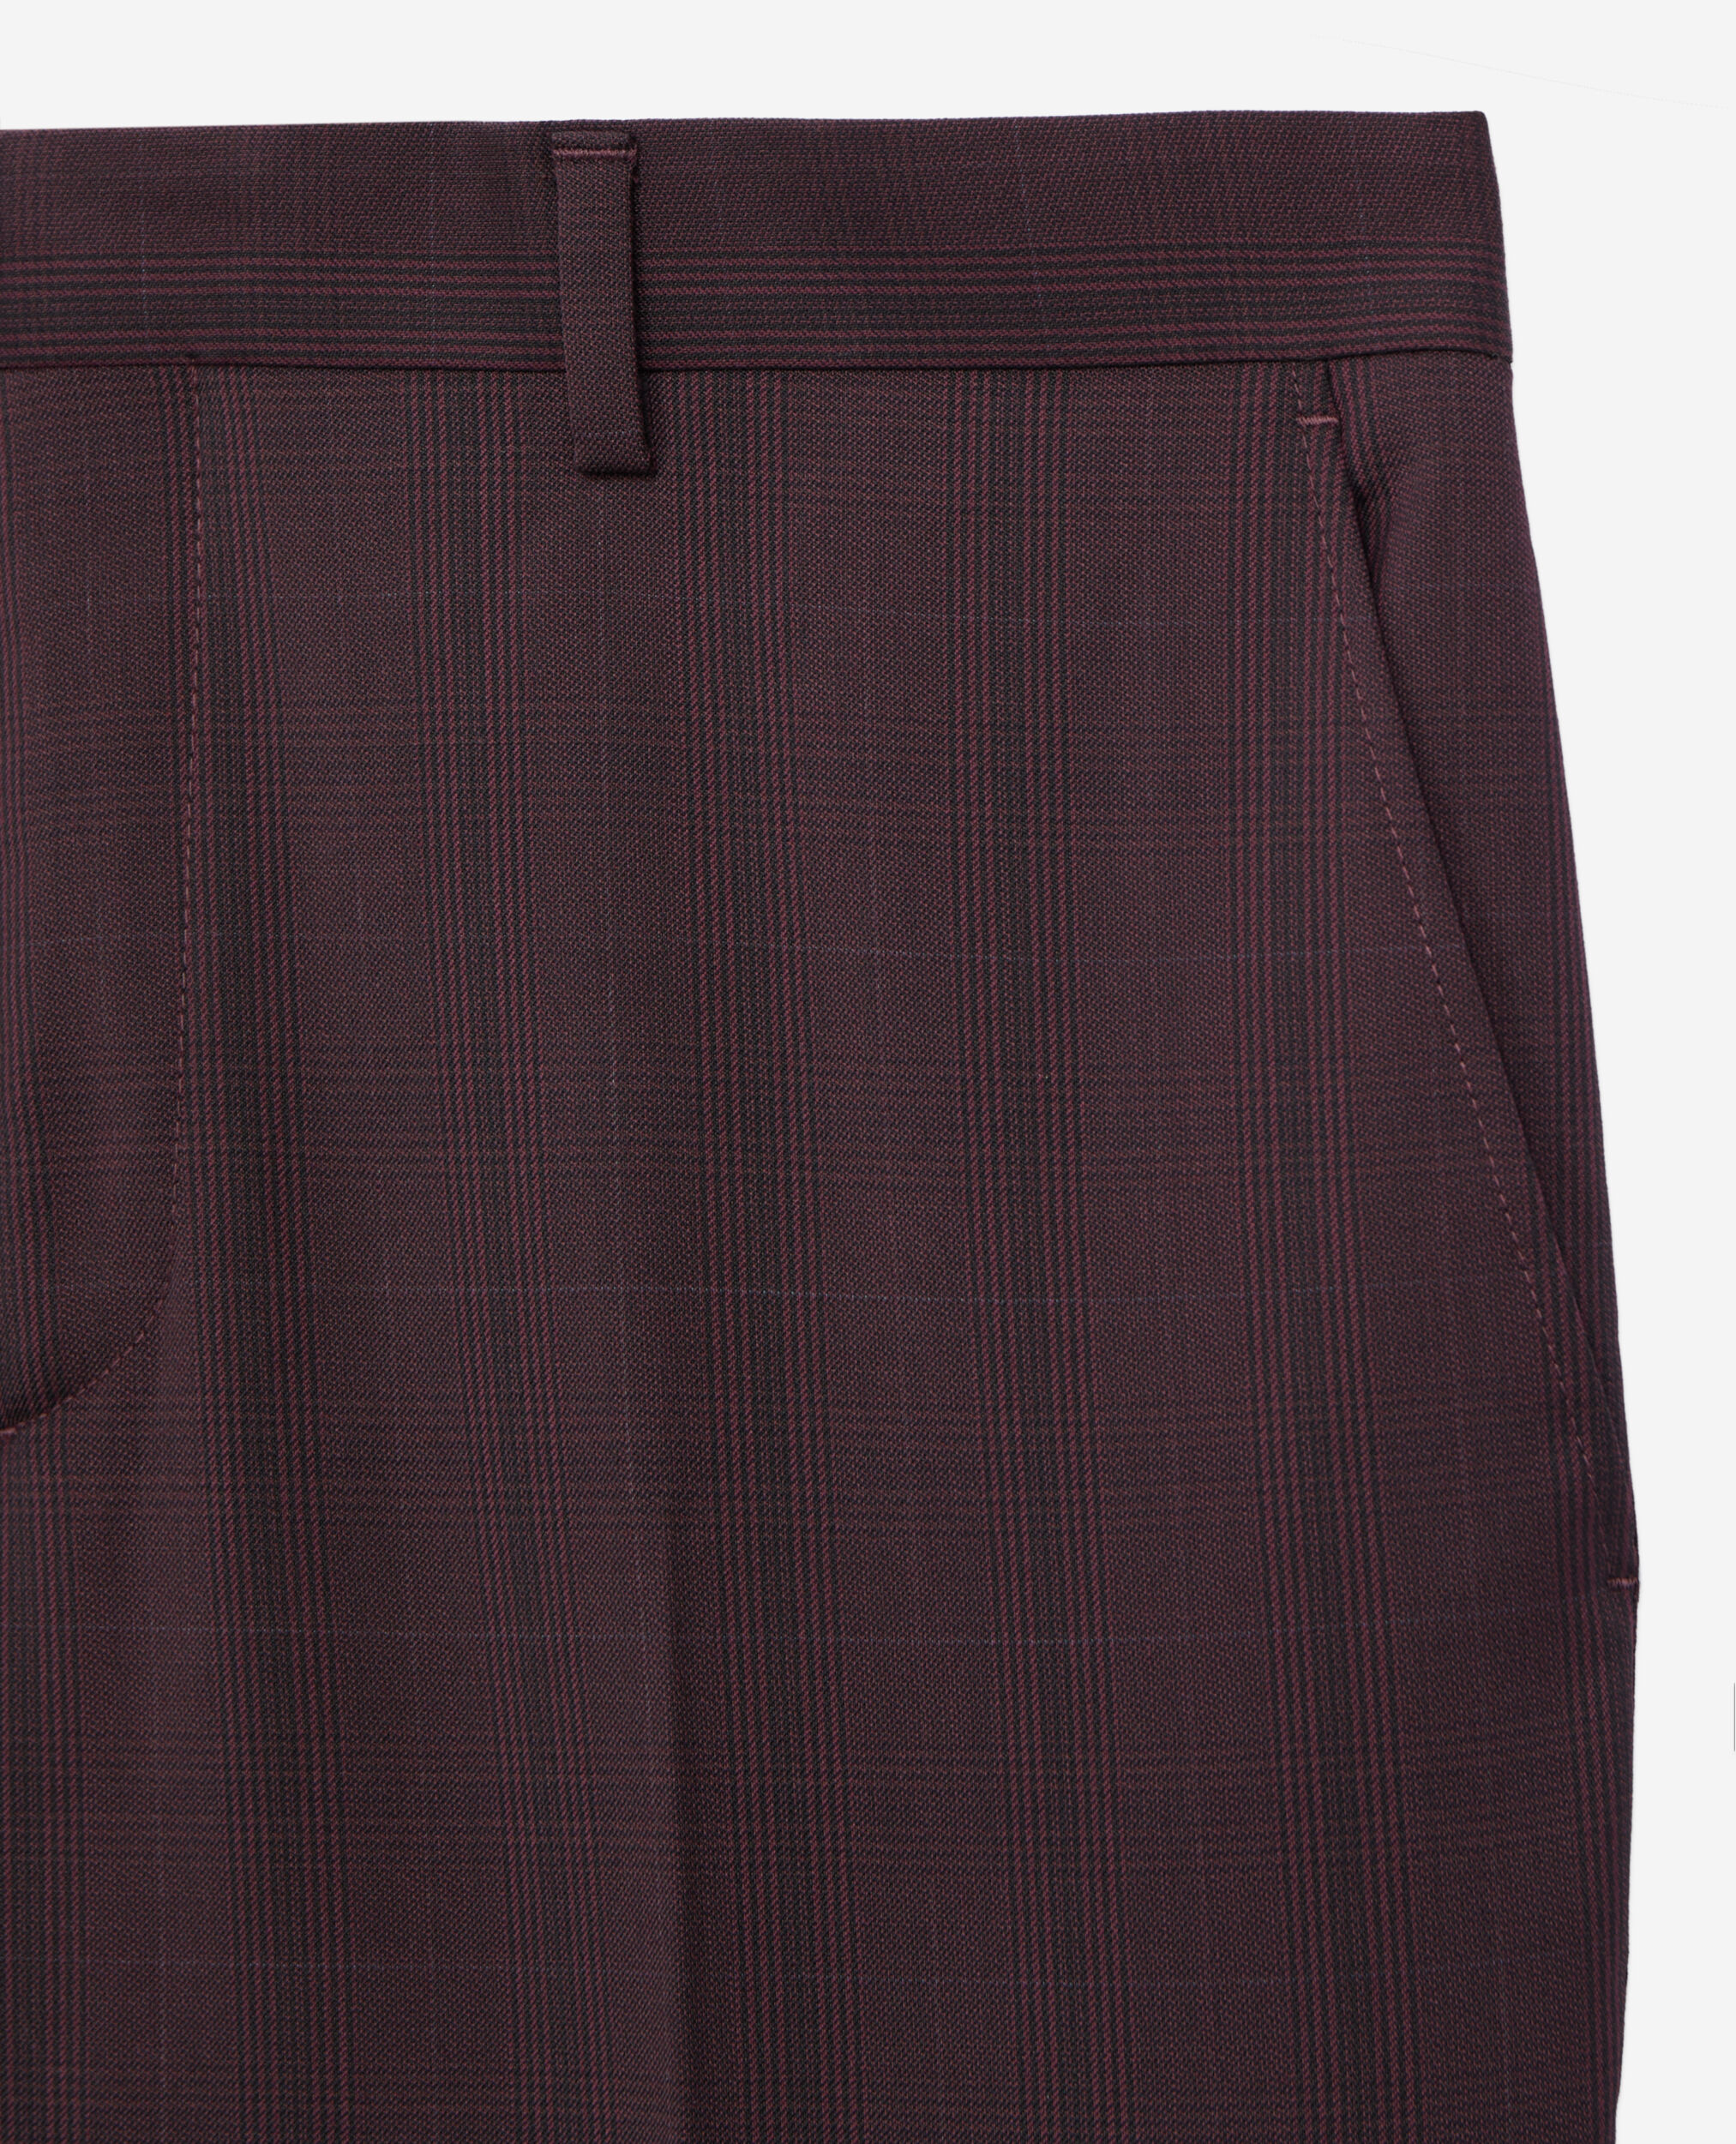 Burgundy checked wool suit trousers, BORDEAUX, hi-res image number null